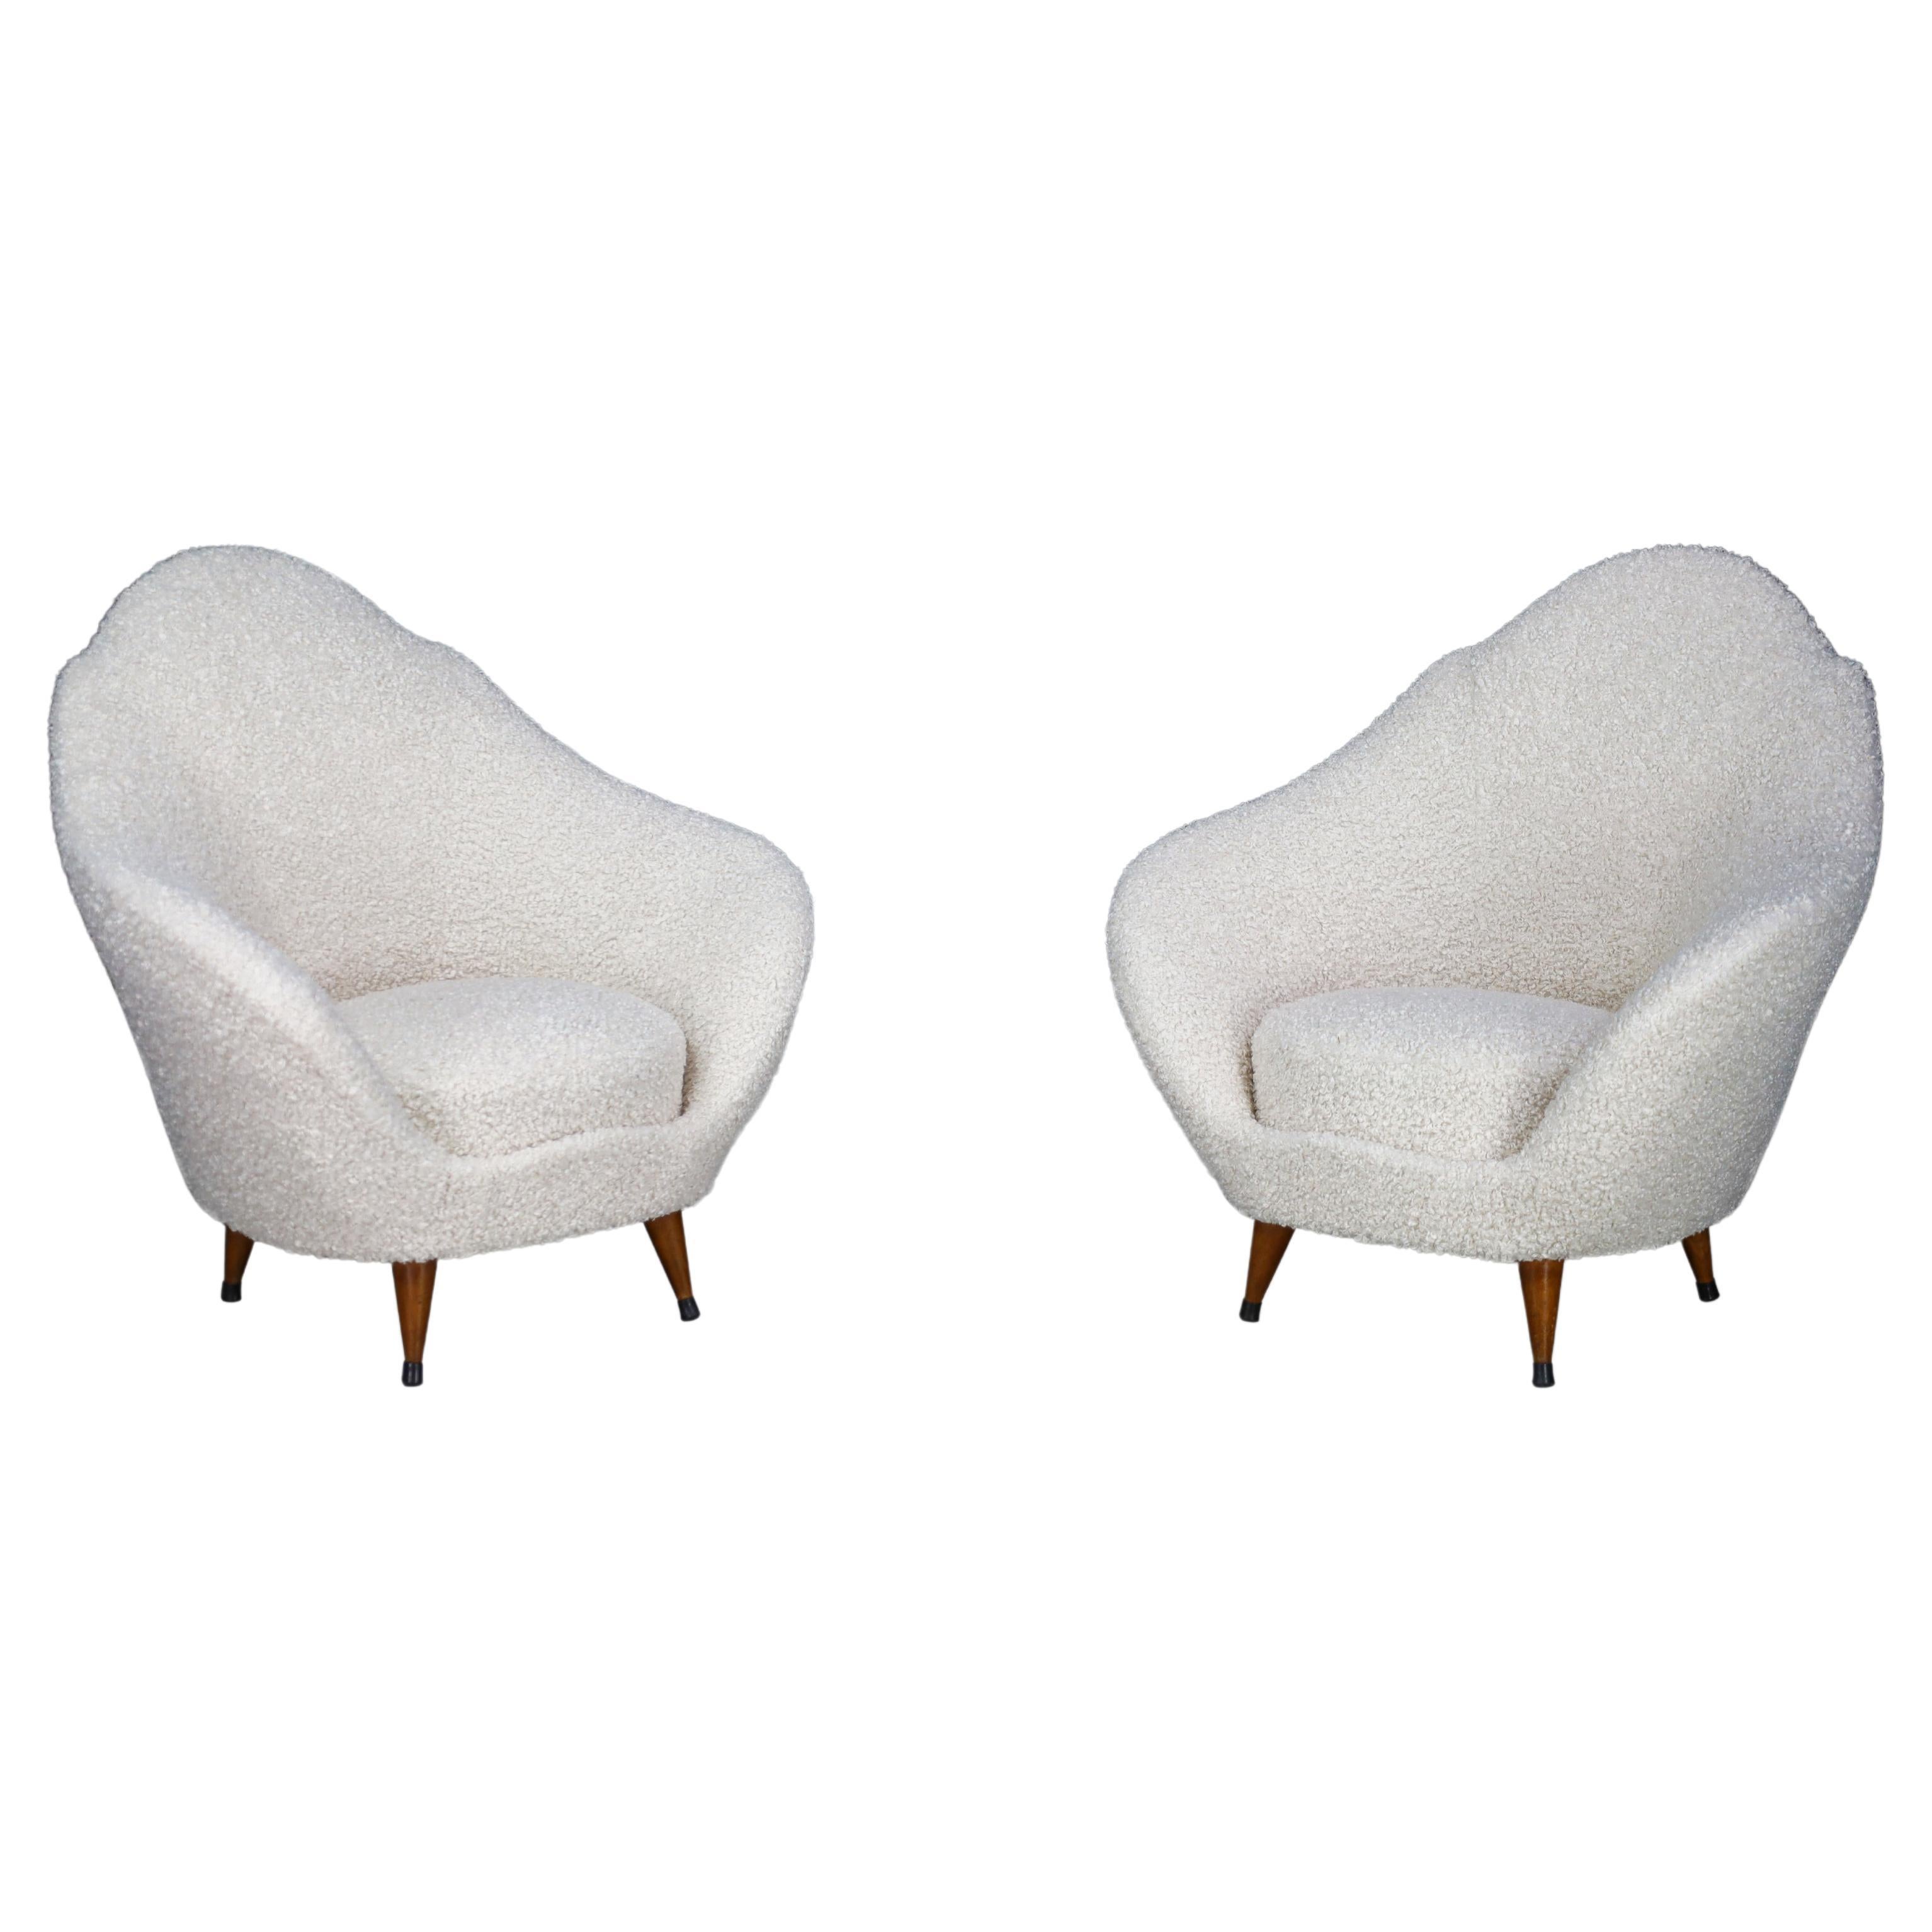 Federico Munari Lounge Chairs with Conical Feet and Teddy Upholstery, Italy  1940 For Sale at 1stDibs